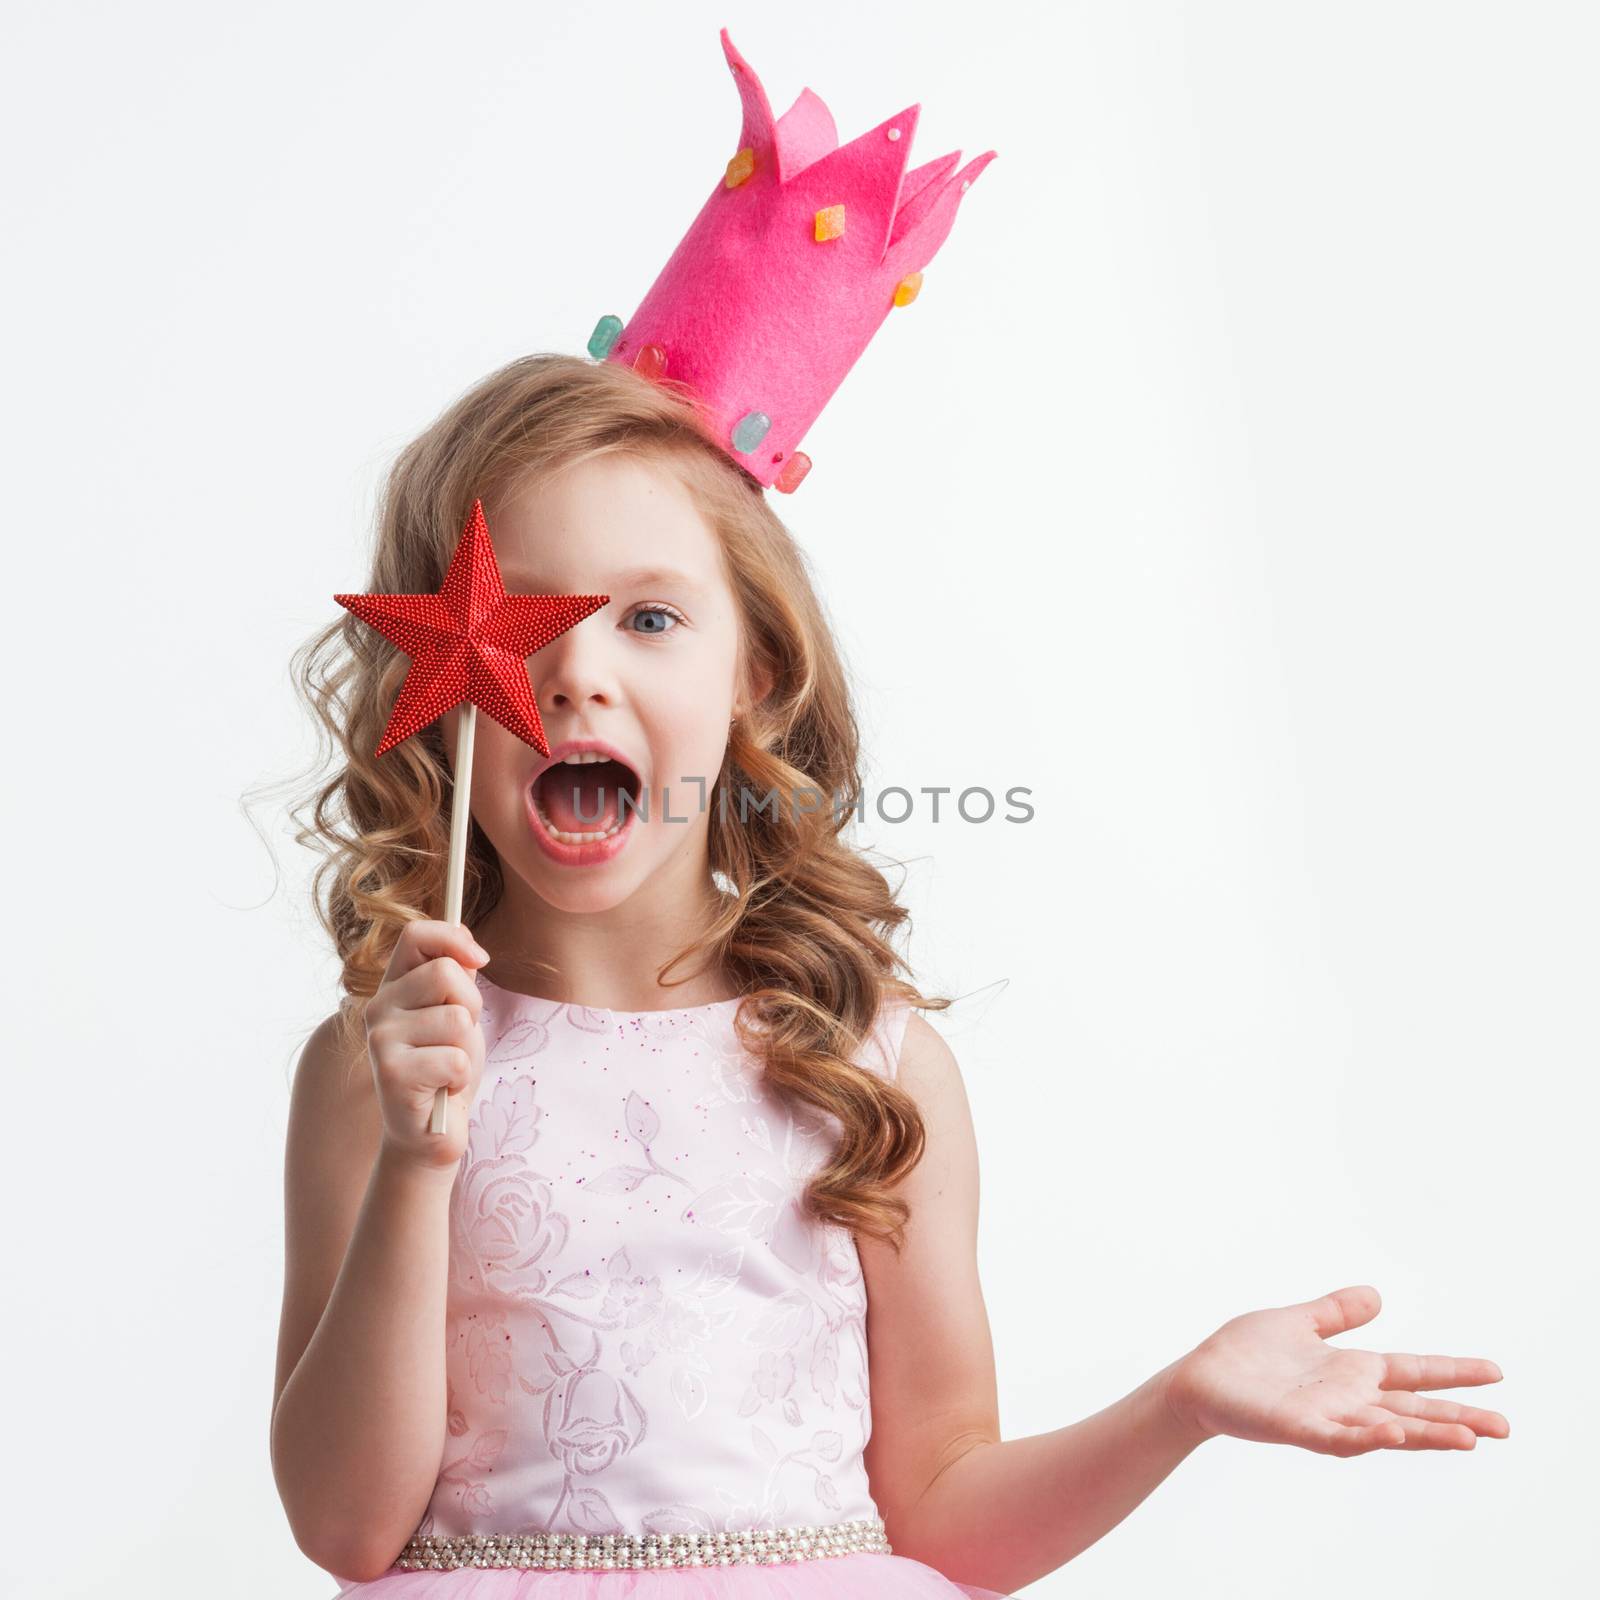 Beautiful little candy princess girl in crown holding star shaped magic wand and making a wish spell isolated on white background